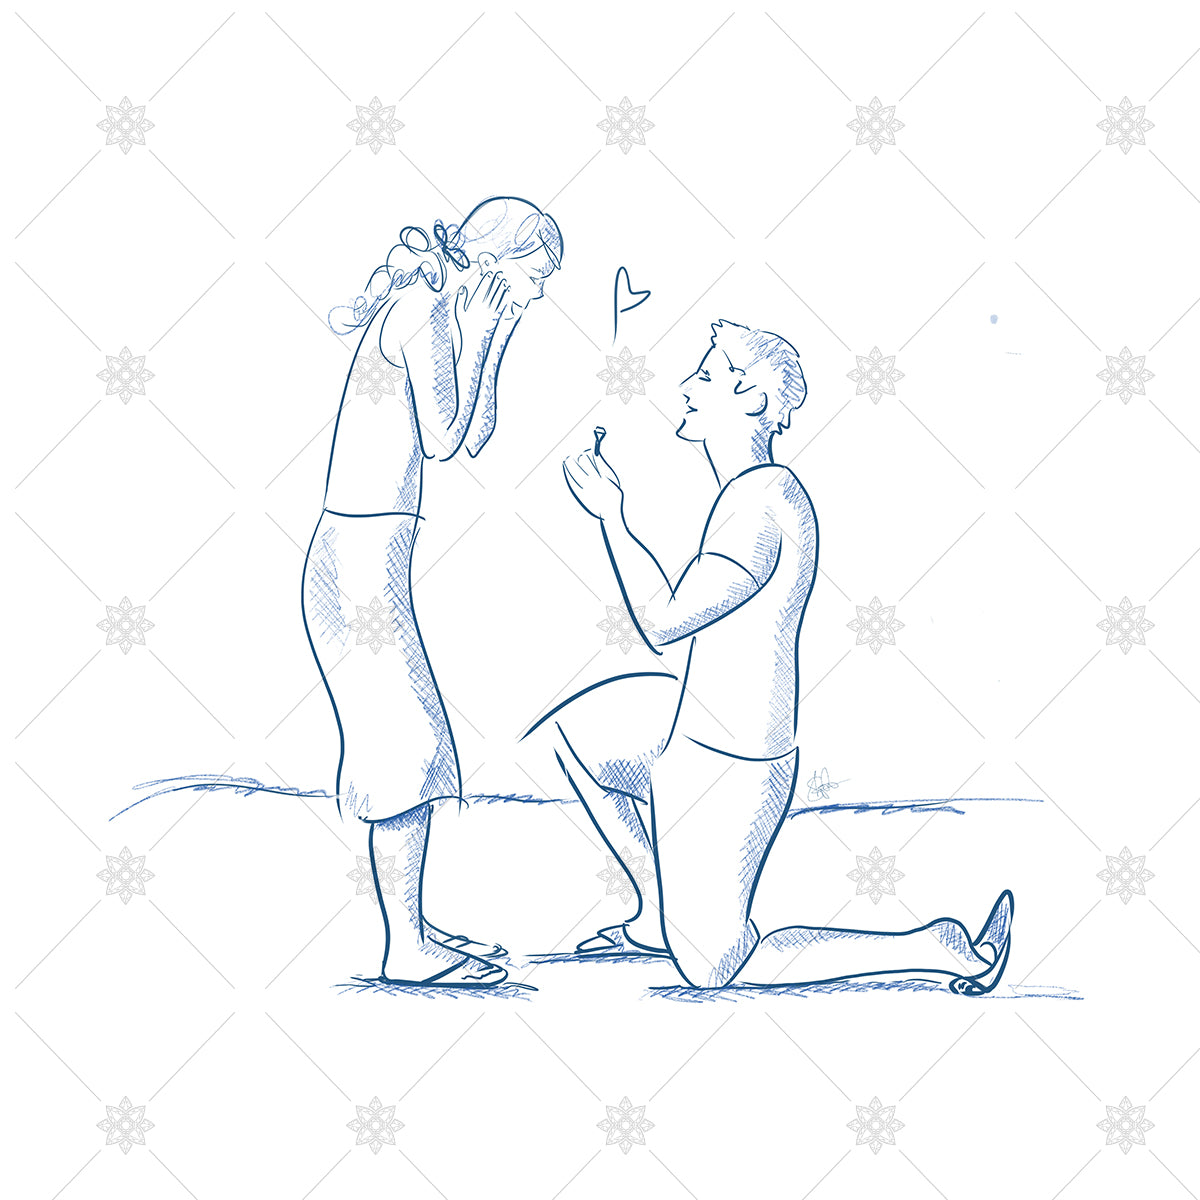 Couple getting engaged sketch - SK1040